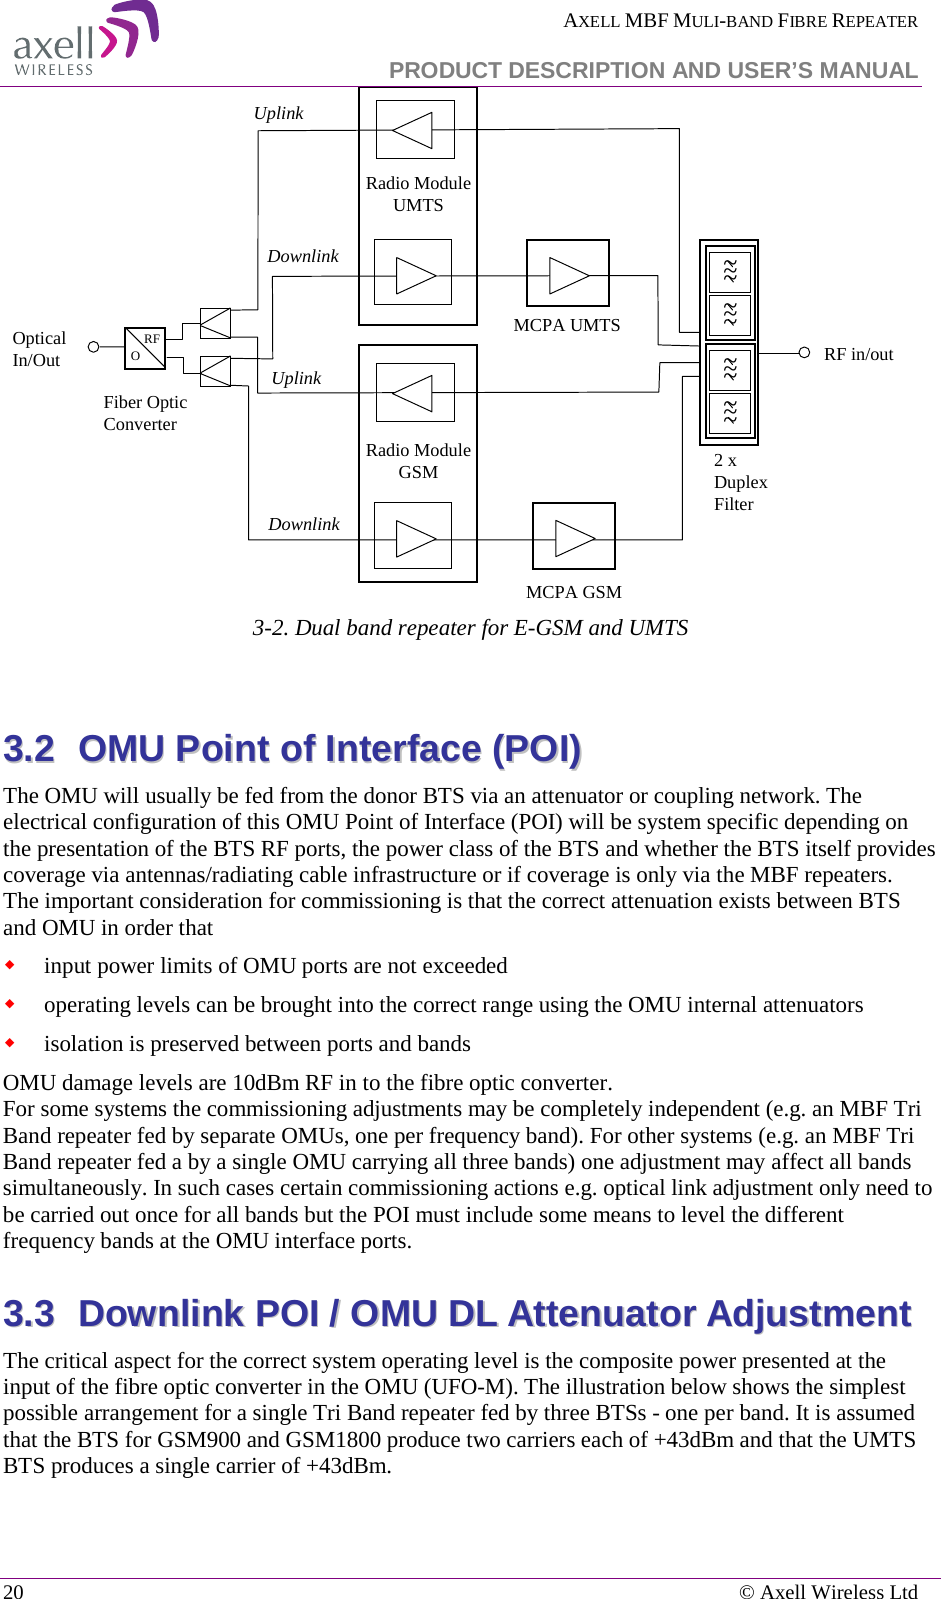  AXELL MBF MULI-BAND FIBRE REPEATER   PRODUCT DESCRIPTION AND USER’S MANUAL 20    © Axell Wireless Ltd   3-2. Dual band repeater for E-GSM and UMTS  33..22  OOMMUU  PPooiinntt  ooff  IInntteerrffaaccee  ((PPOOII))  The OMU will usually be fed from the donor BTS via an attenuator or coupling network. The electrical configuration of this OMU Point of Interface (POI) will be system specific depending on the presentation of the BTS RF ports, the power class of the BTS and whether the BTS itself provides coverage via antennas/radiating cable infrastructure or if coverage is only via the MBF repeaters.  The important consideration for commissioning is that the correct attenuation exists between BTS and OMU in order that   input power limits of OMU ports are not exceeded  operating levels can be brought into the correct range using the OMU internal attenuators  isolation is preserved between ports and bands  OMU damage levels are 10dBm RF in to the fibre optic converter. For some systems the commissioning adjustments may be completely independent (e.g. an MBF Tri Band repeater fed by separate OMUs, one per frequency band). For other systems (e.g. an MBF Tri Band repeater fed a by a single OMU carrying all three bands) one adjustment may affect all bands simultaneously. In such cases certain commissioning actions e.g. optical link adjustment only need to be carried out once for all bands but the POI must include some means to level the different frequency bands at the OMU interface ports.  33..33  DDoowwnnlliinnkk  PPOOII  //  OOMMUU  DDLL  AAtttteennuuaattoorr  AAddjjuussttmmeenntt  The critical aspect for the correct system operating level is the composite power presented at the input of the fibre optic converter in the OMU (UFO-M). The illustration below shows the simplest possible arrangement for a single Tri Band repeater fed by three BTSs - one per band. It is assumed that the BTS for GSM900 and GSM1800 produce two carriers each of +43dBm and that the UMTS BTS produces a single carrier of +43dBm.  MCPA UMTS2 x Duplex FilterRFOOpticalIn/OutDownlinkUplinkRF in/outFiber OpticConverterRadio Module UMTSRadio Module GSMMCPA GSMDownlinkUplink~~~~~~~~~~~~~~~~~~~~~~~~